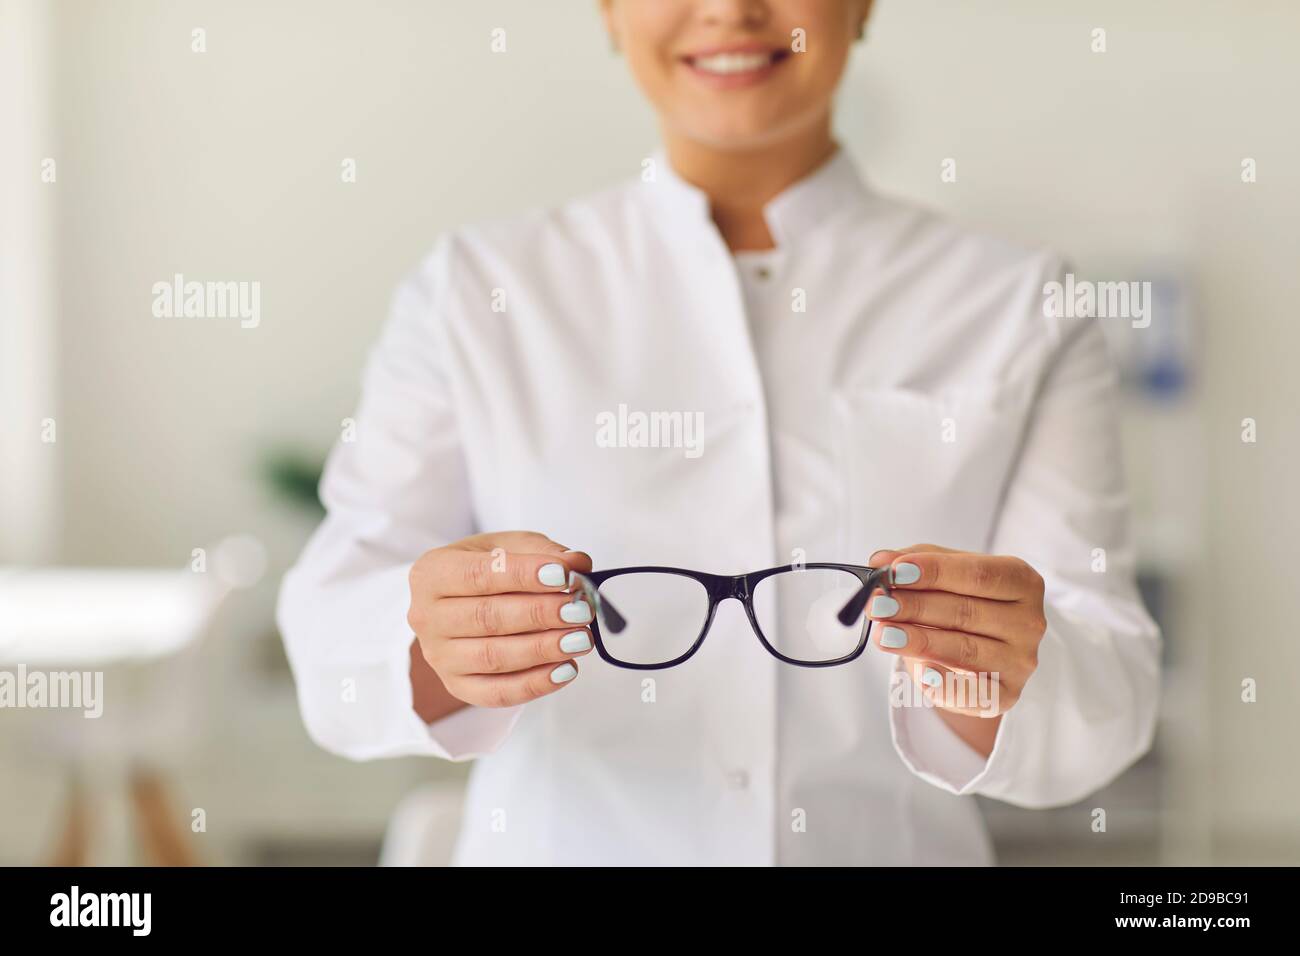 Professional vision specialist in a clinic or store holding a pair of glasses with new lenses. Stock Photo